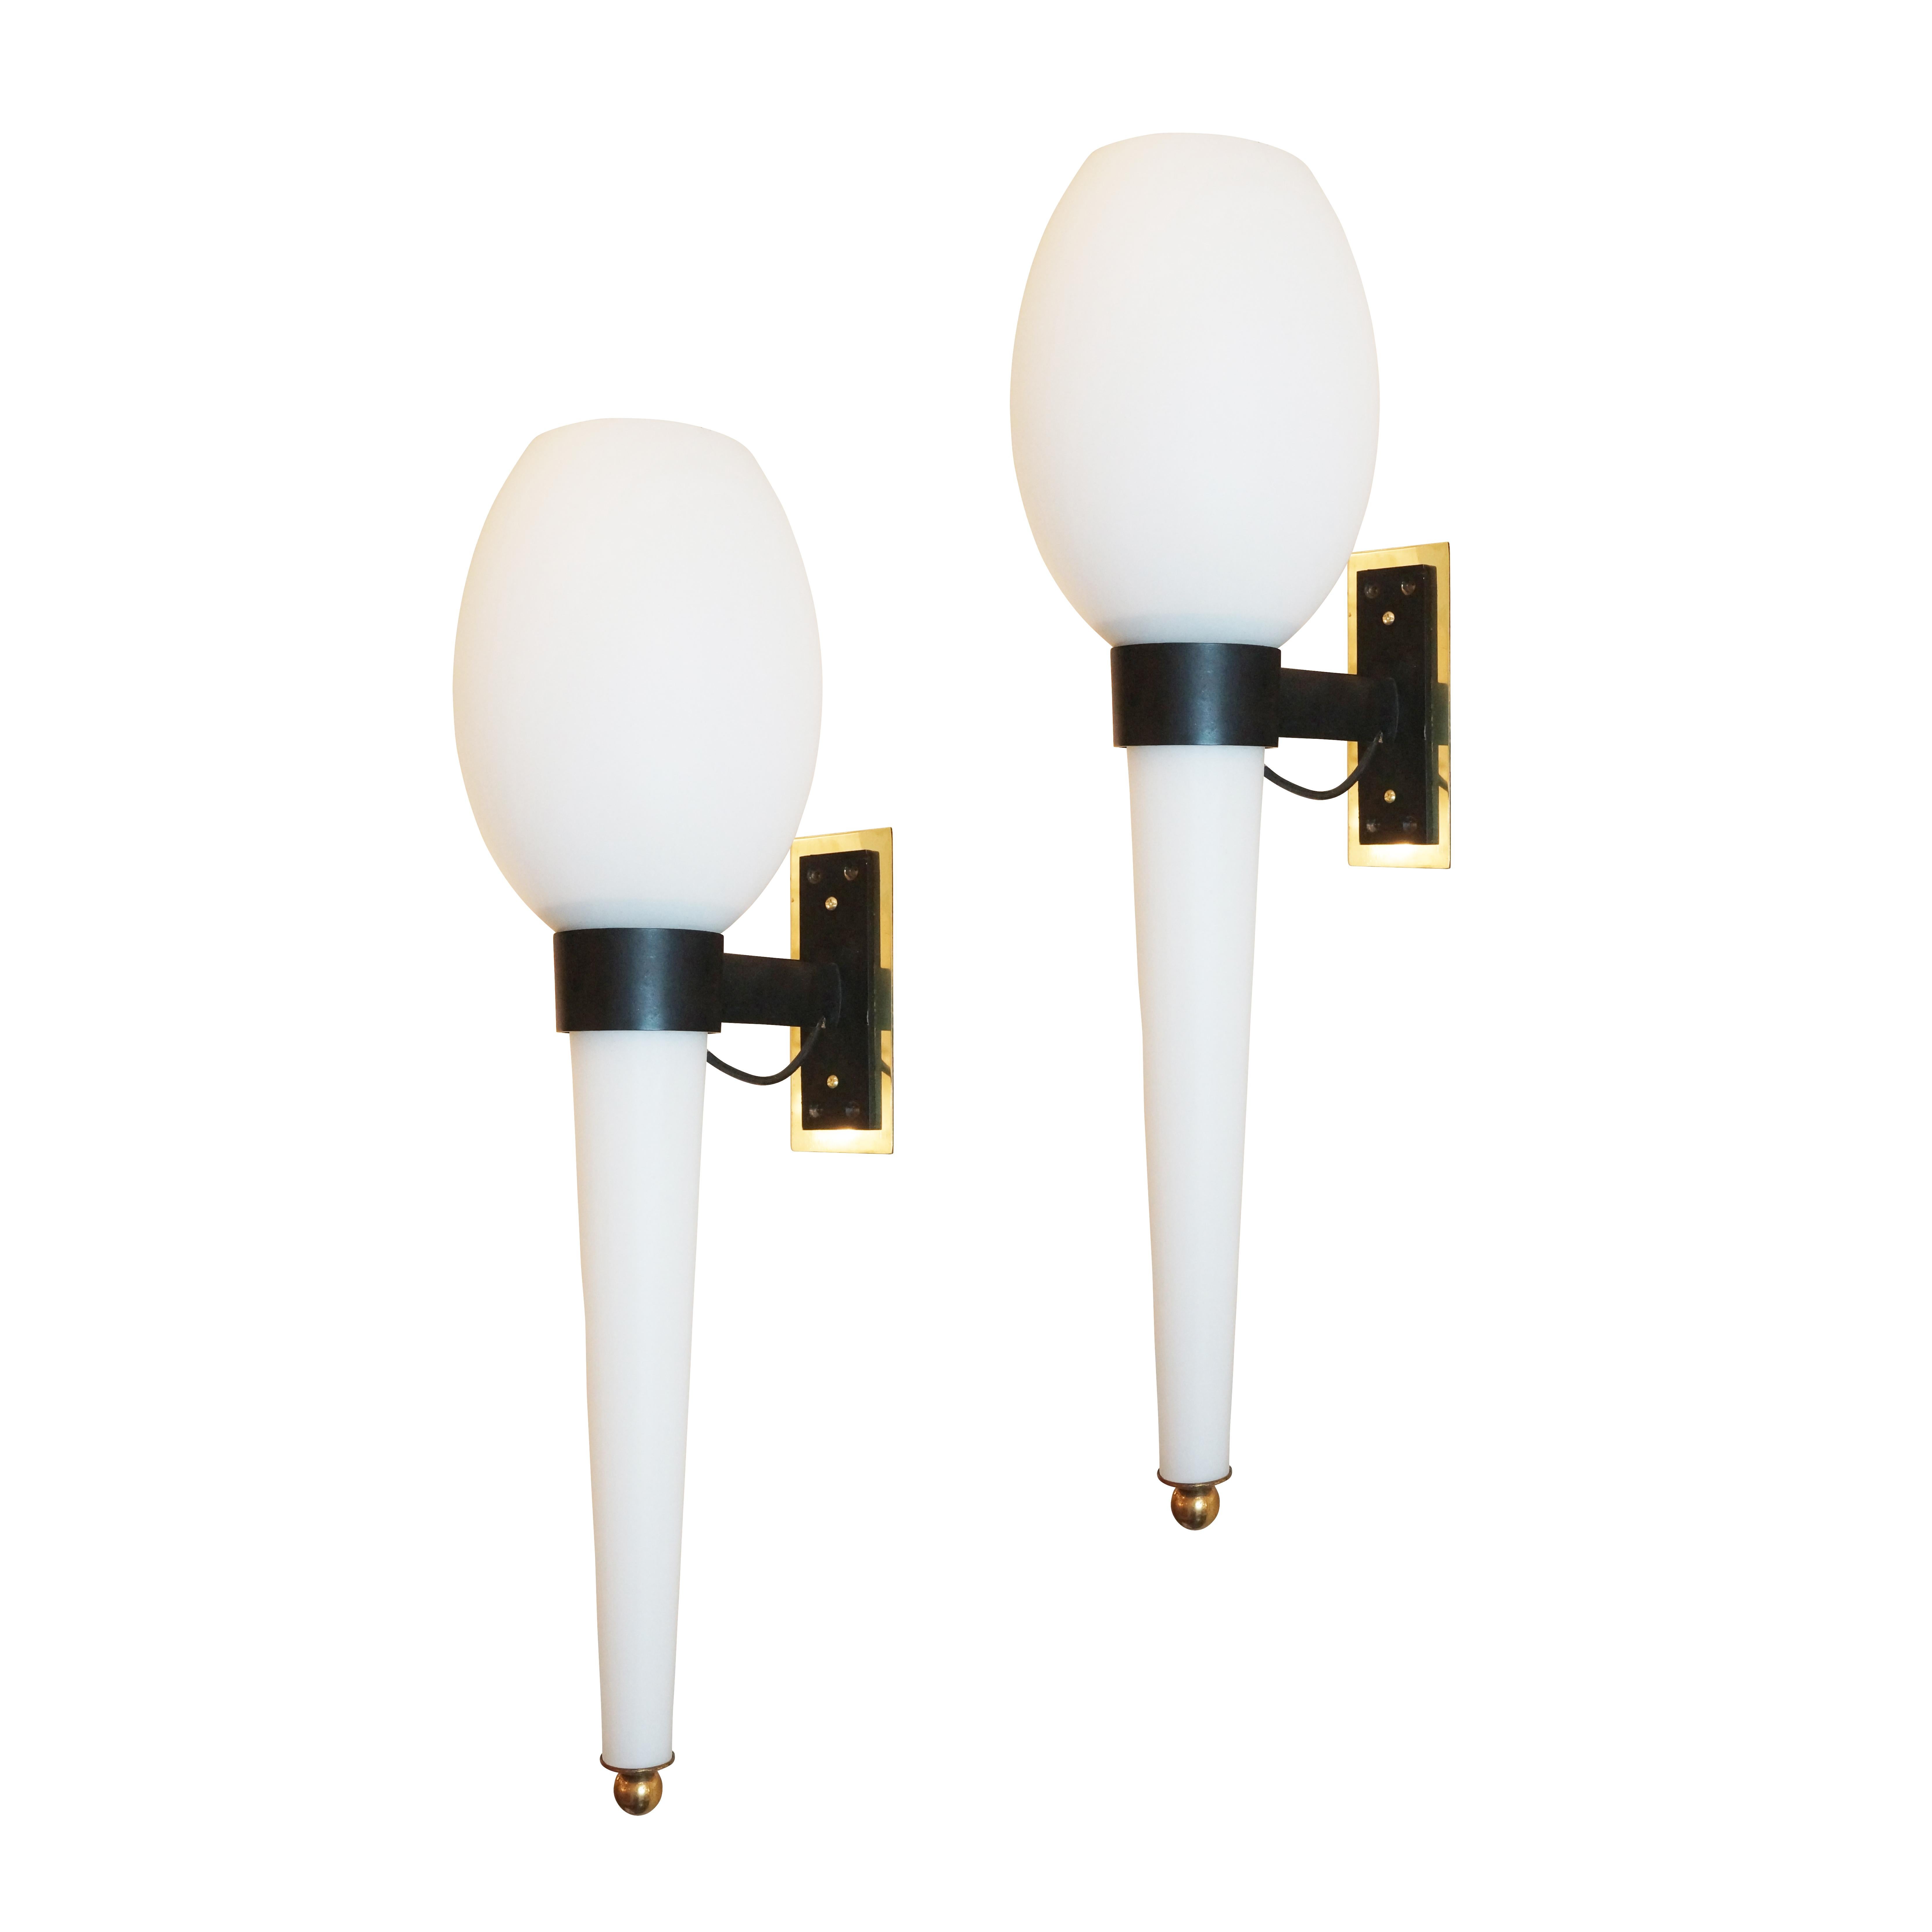 Italian Pair of Elongated Frosted Glass Sconces, Italy, 1950s For Sale